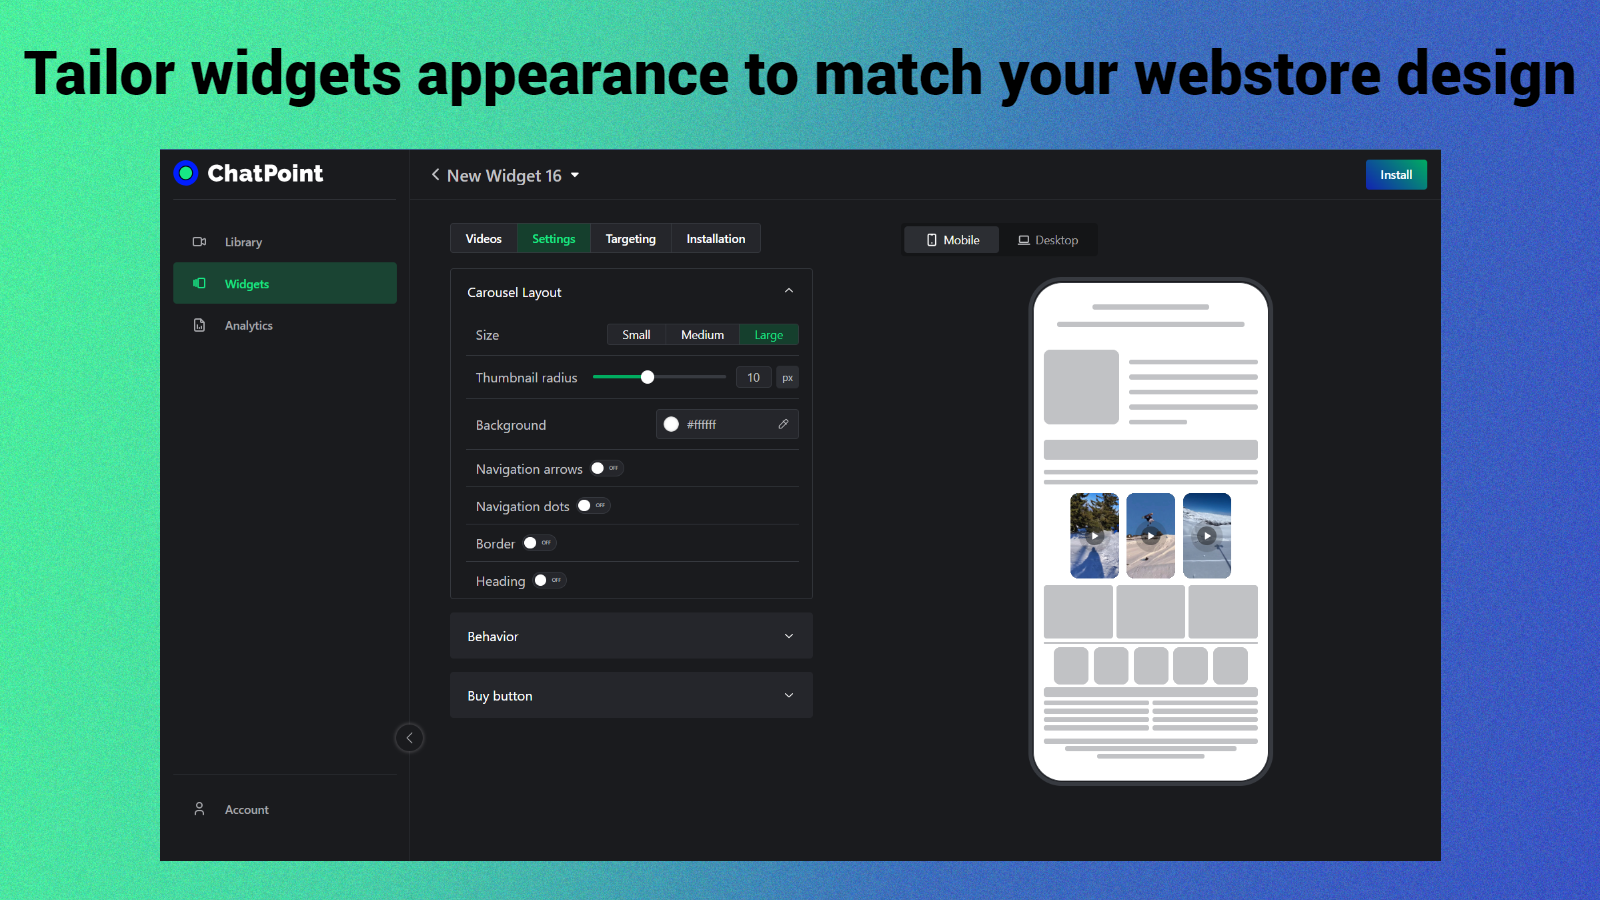 Tailor widgets appearance to match your webstore design